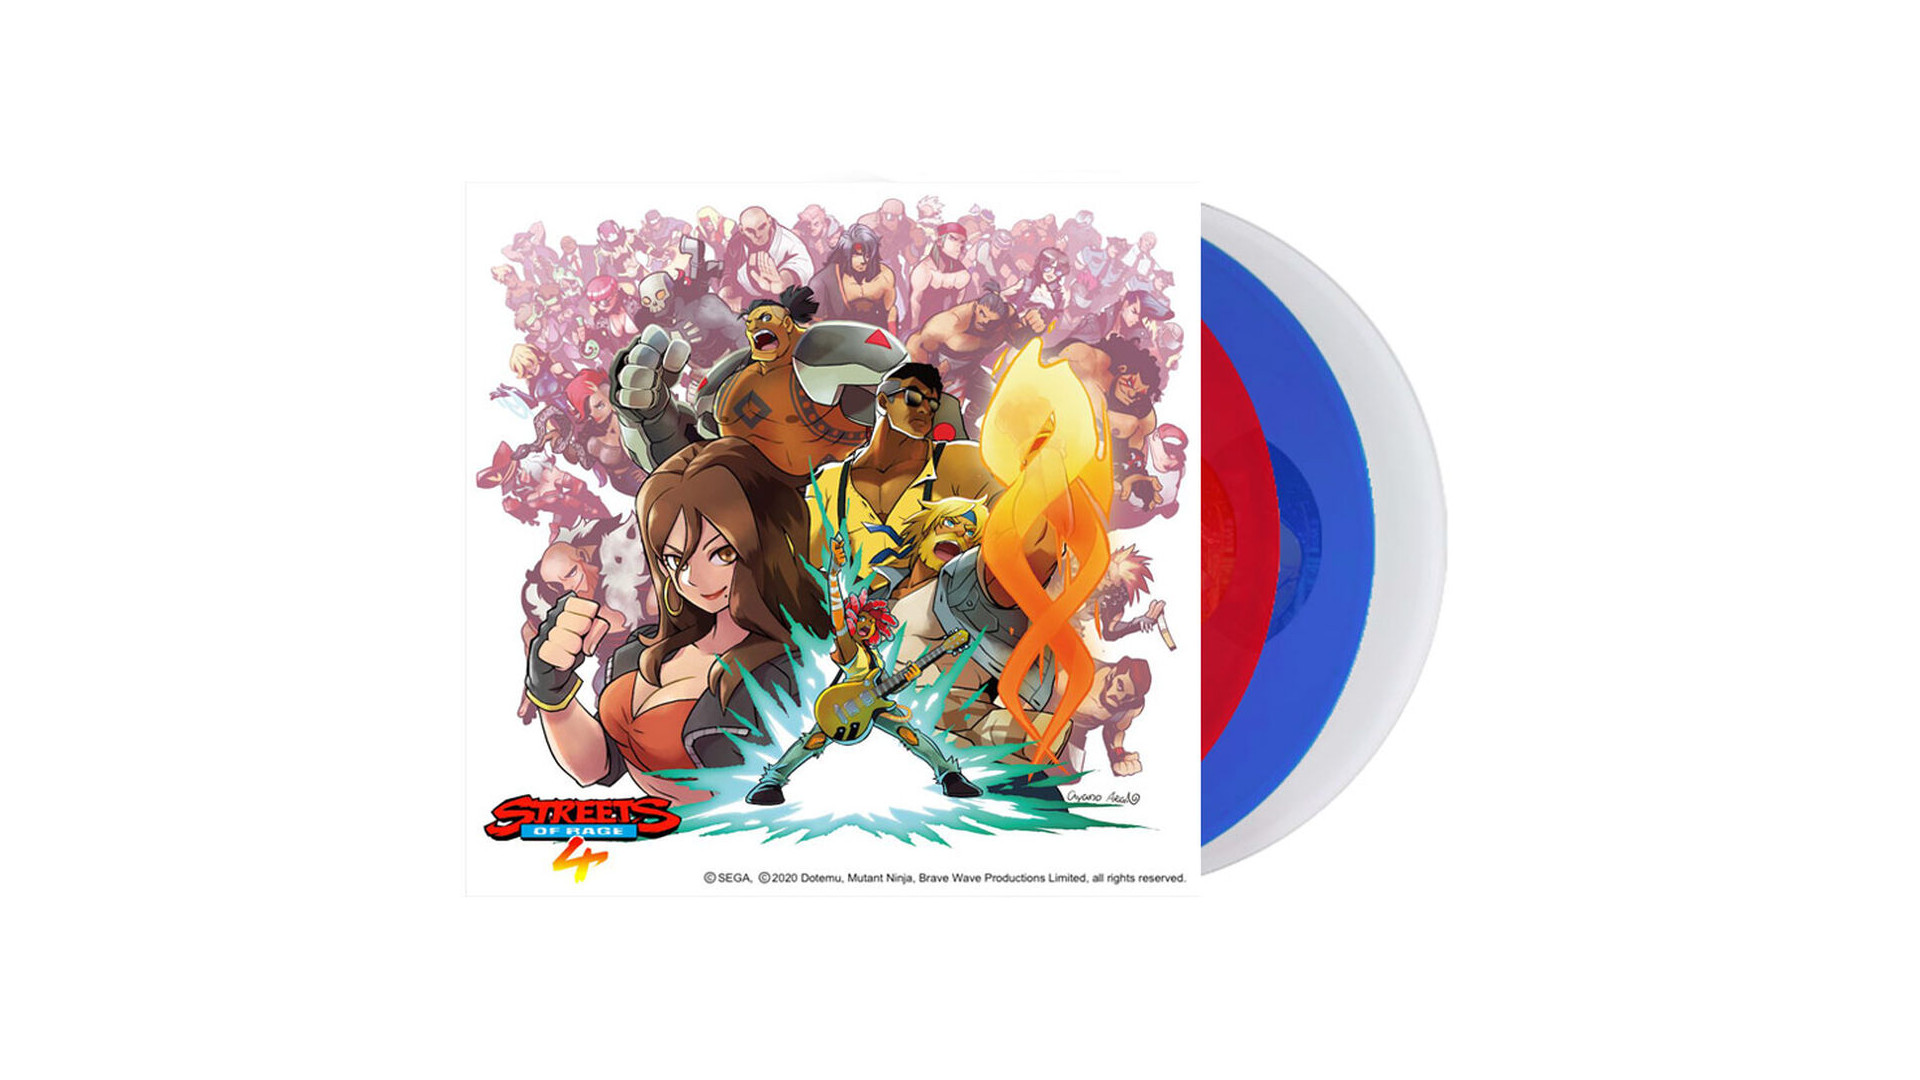 Acheter Vinyle Streets Of Rage 4 The Definitive Soundtrack Colore Exclu Micromania DIVERS